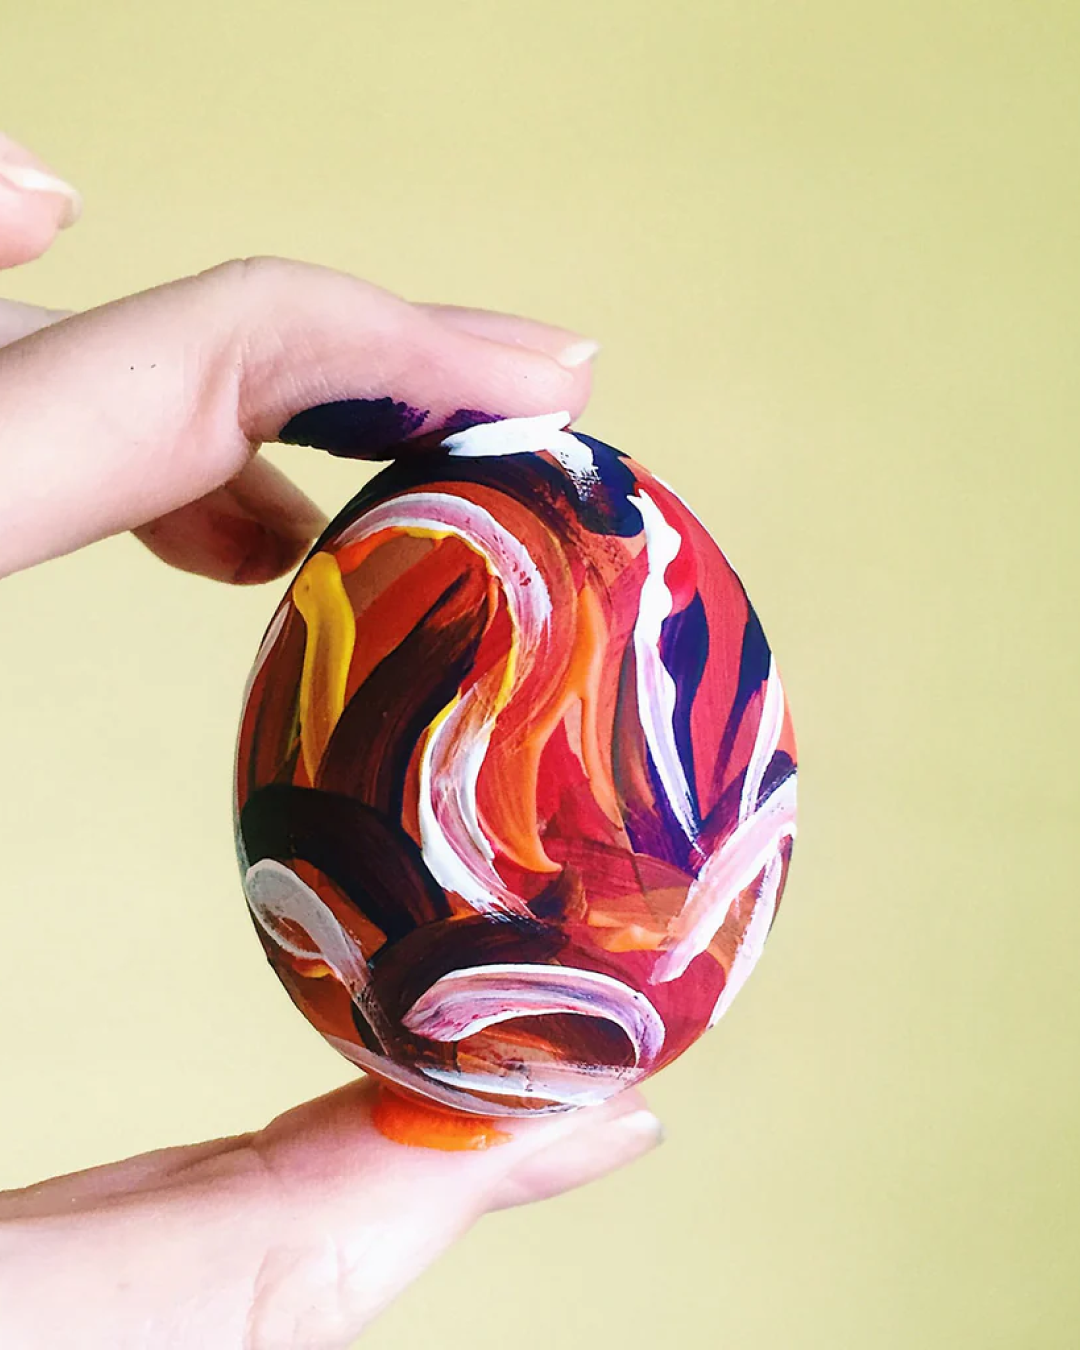 Egg decorated with acrylic paint in abstract lines